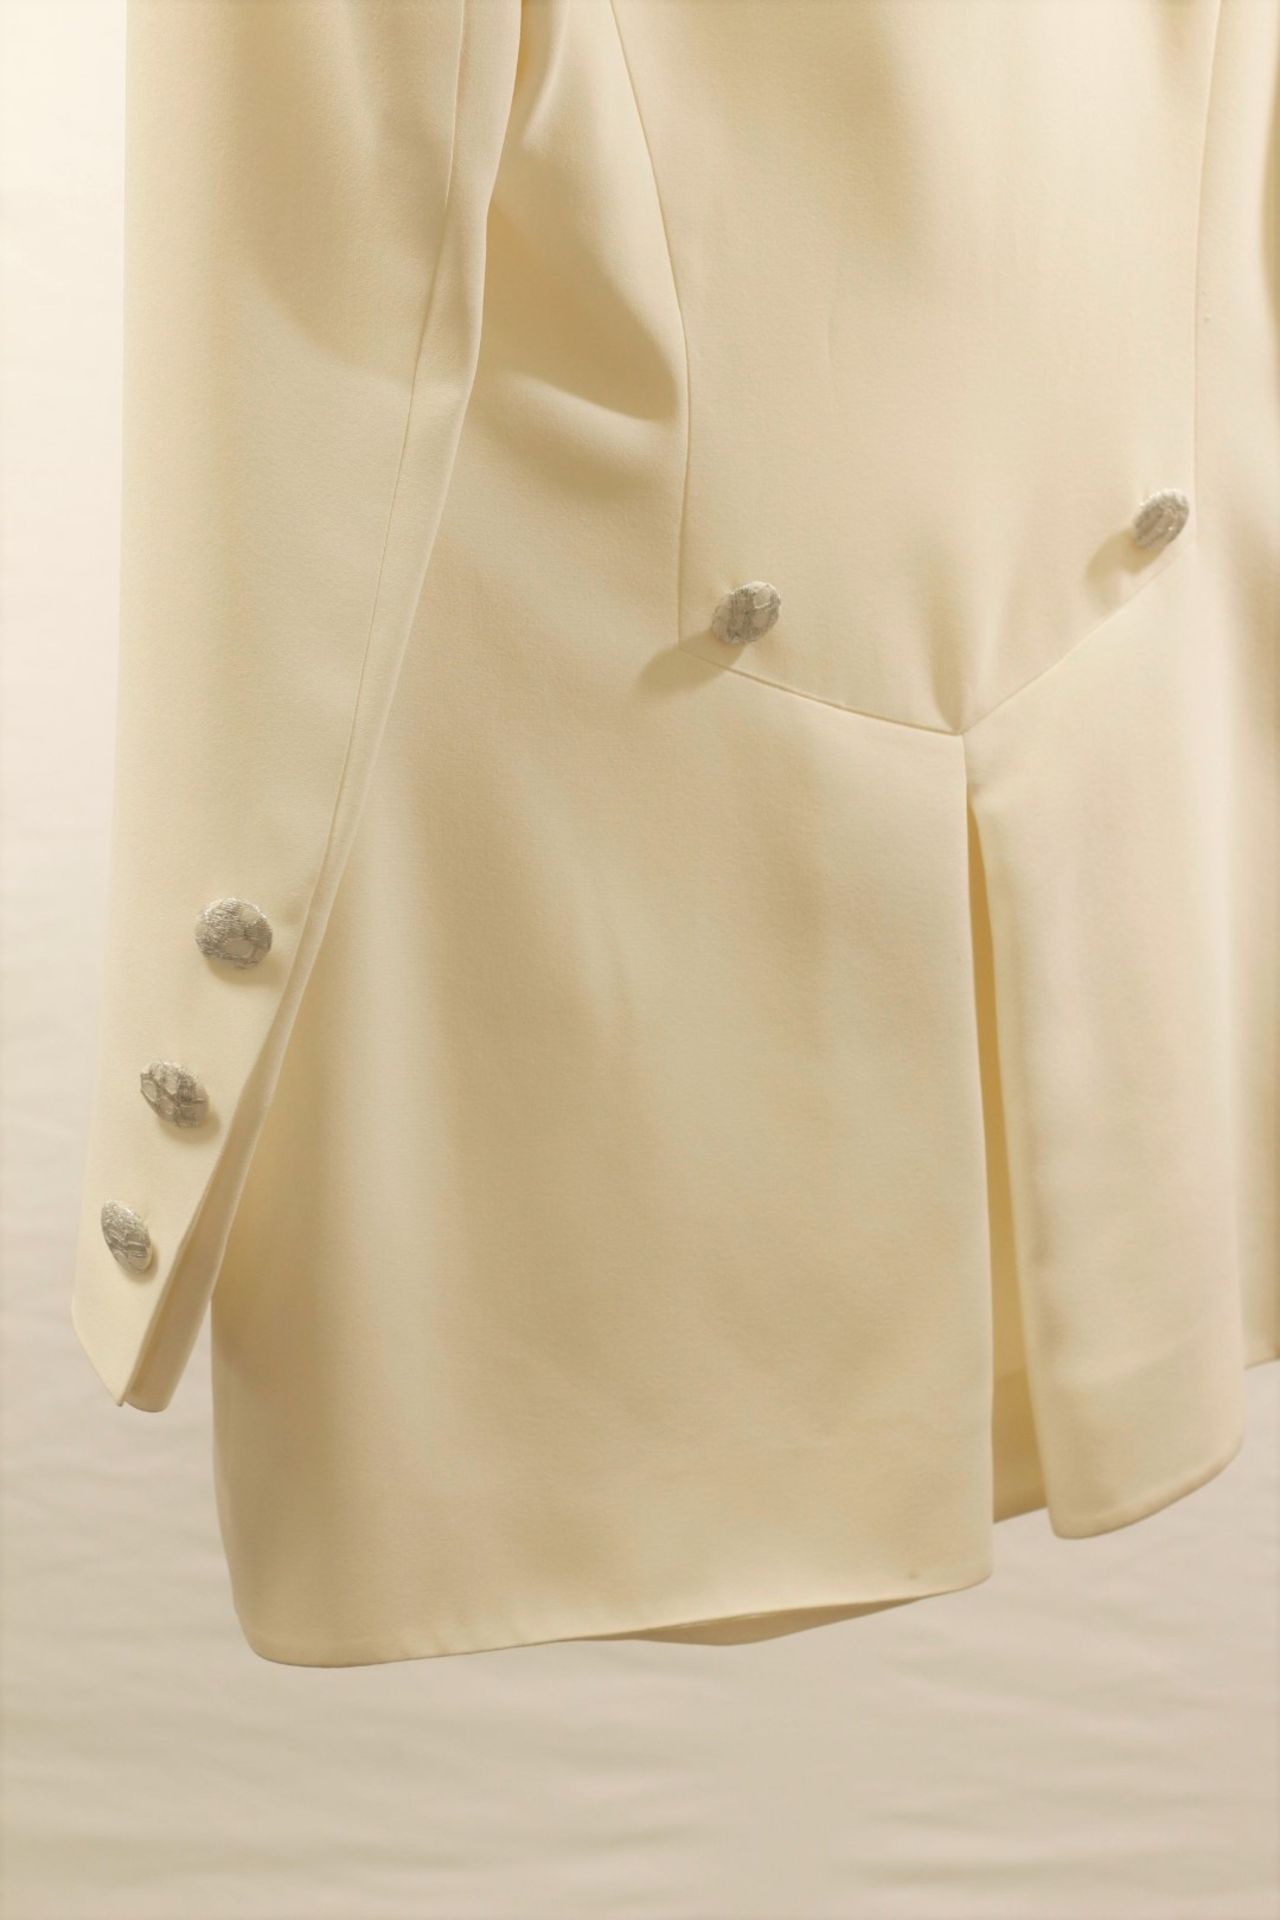 1 x Boutique Le Duc Cream Jacket - Size: 16 - Material: 52% Viscose, 48% Acetate - From a High End - Image 7 of 17